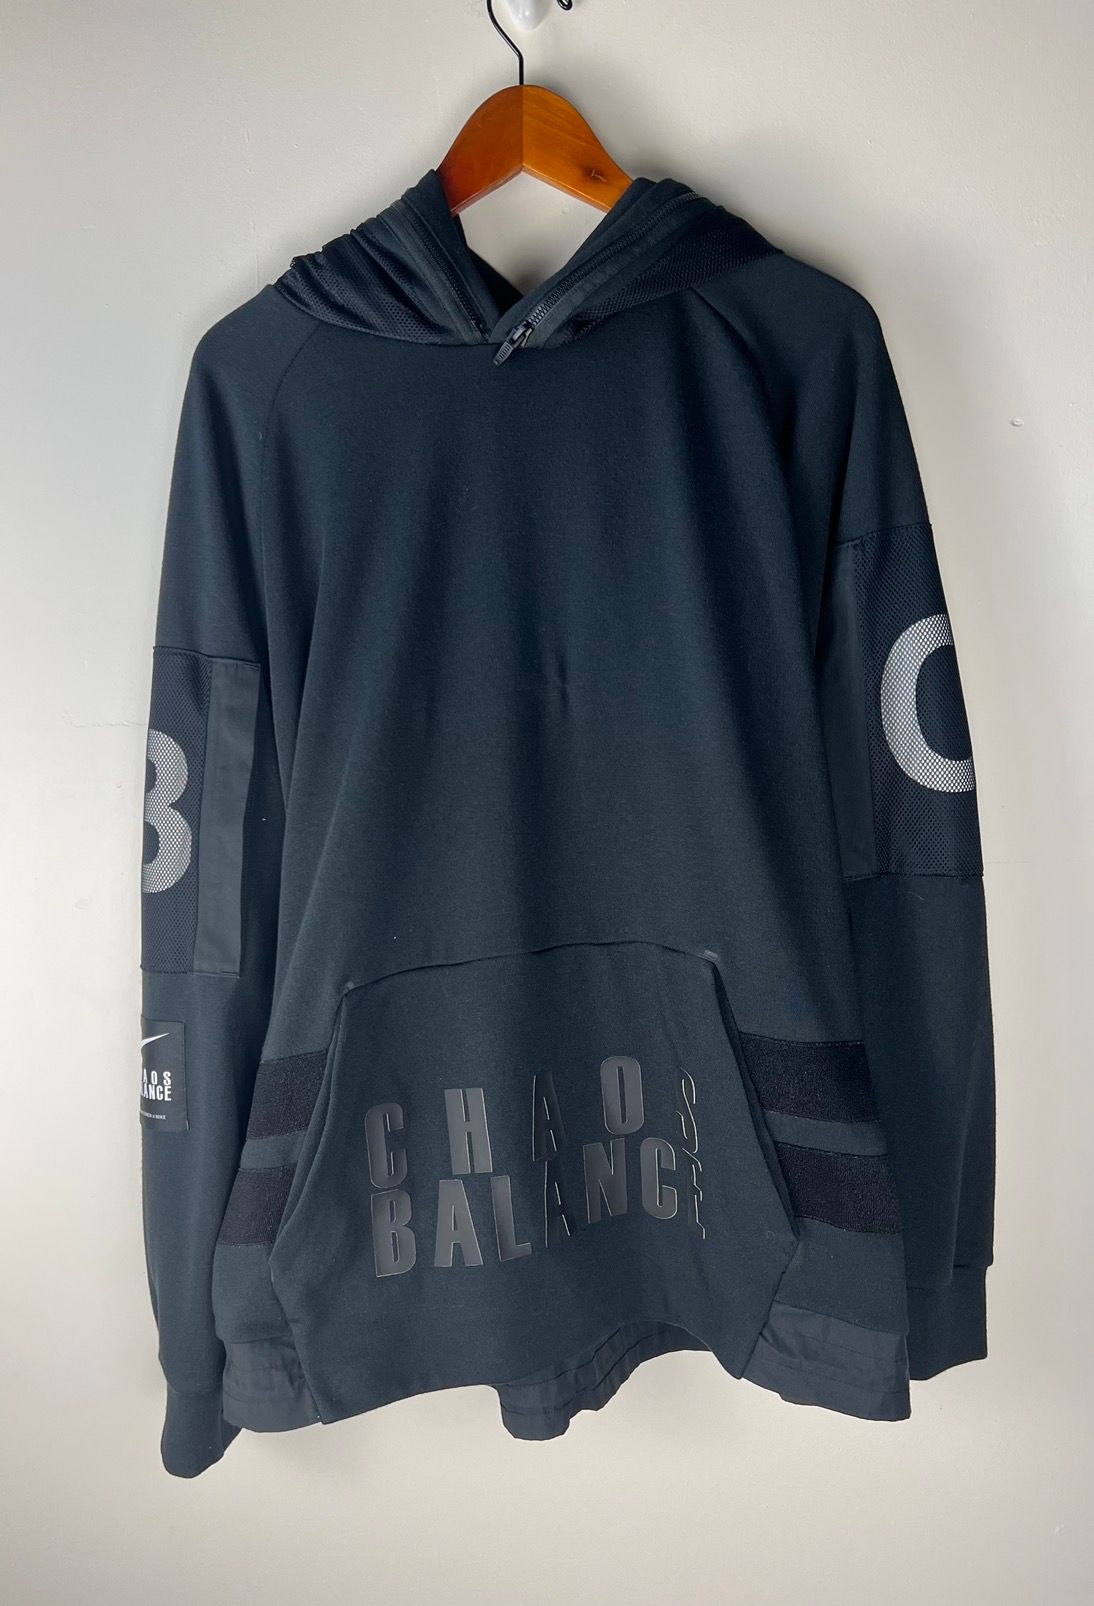 Undercover Nike Undercover chaos and balance hoodie   Grailed